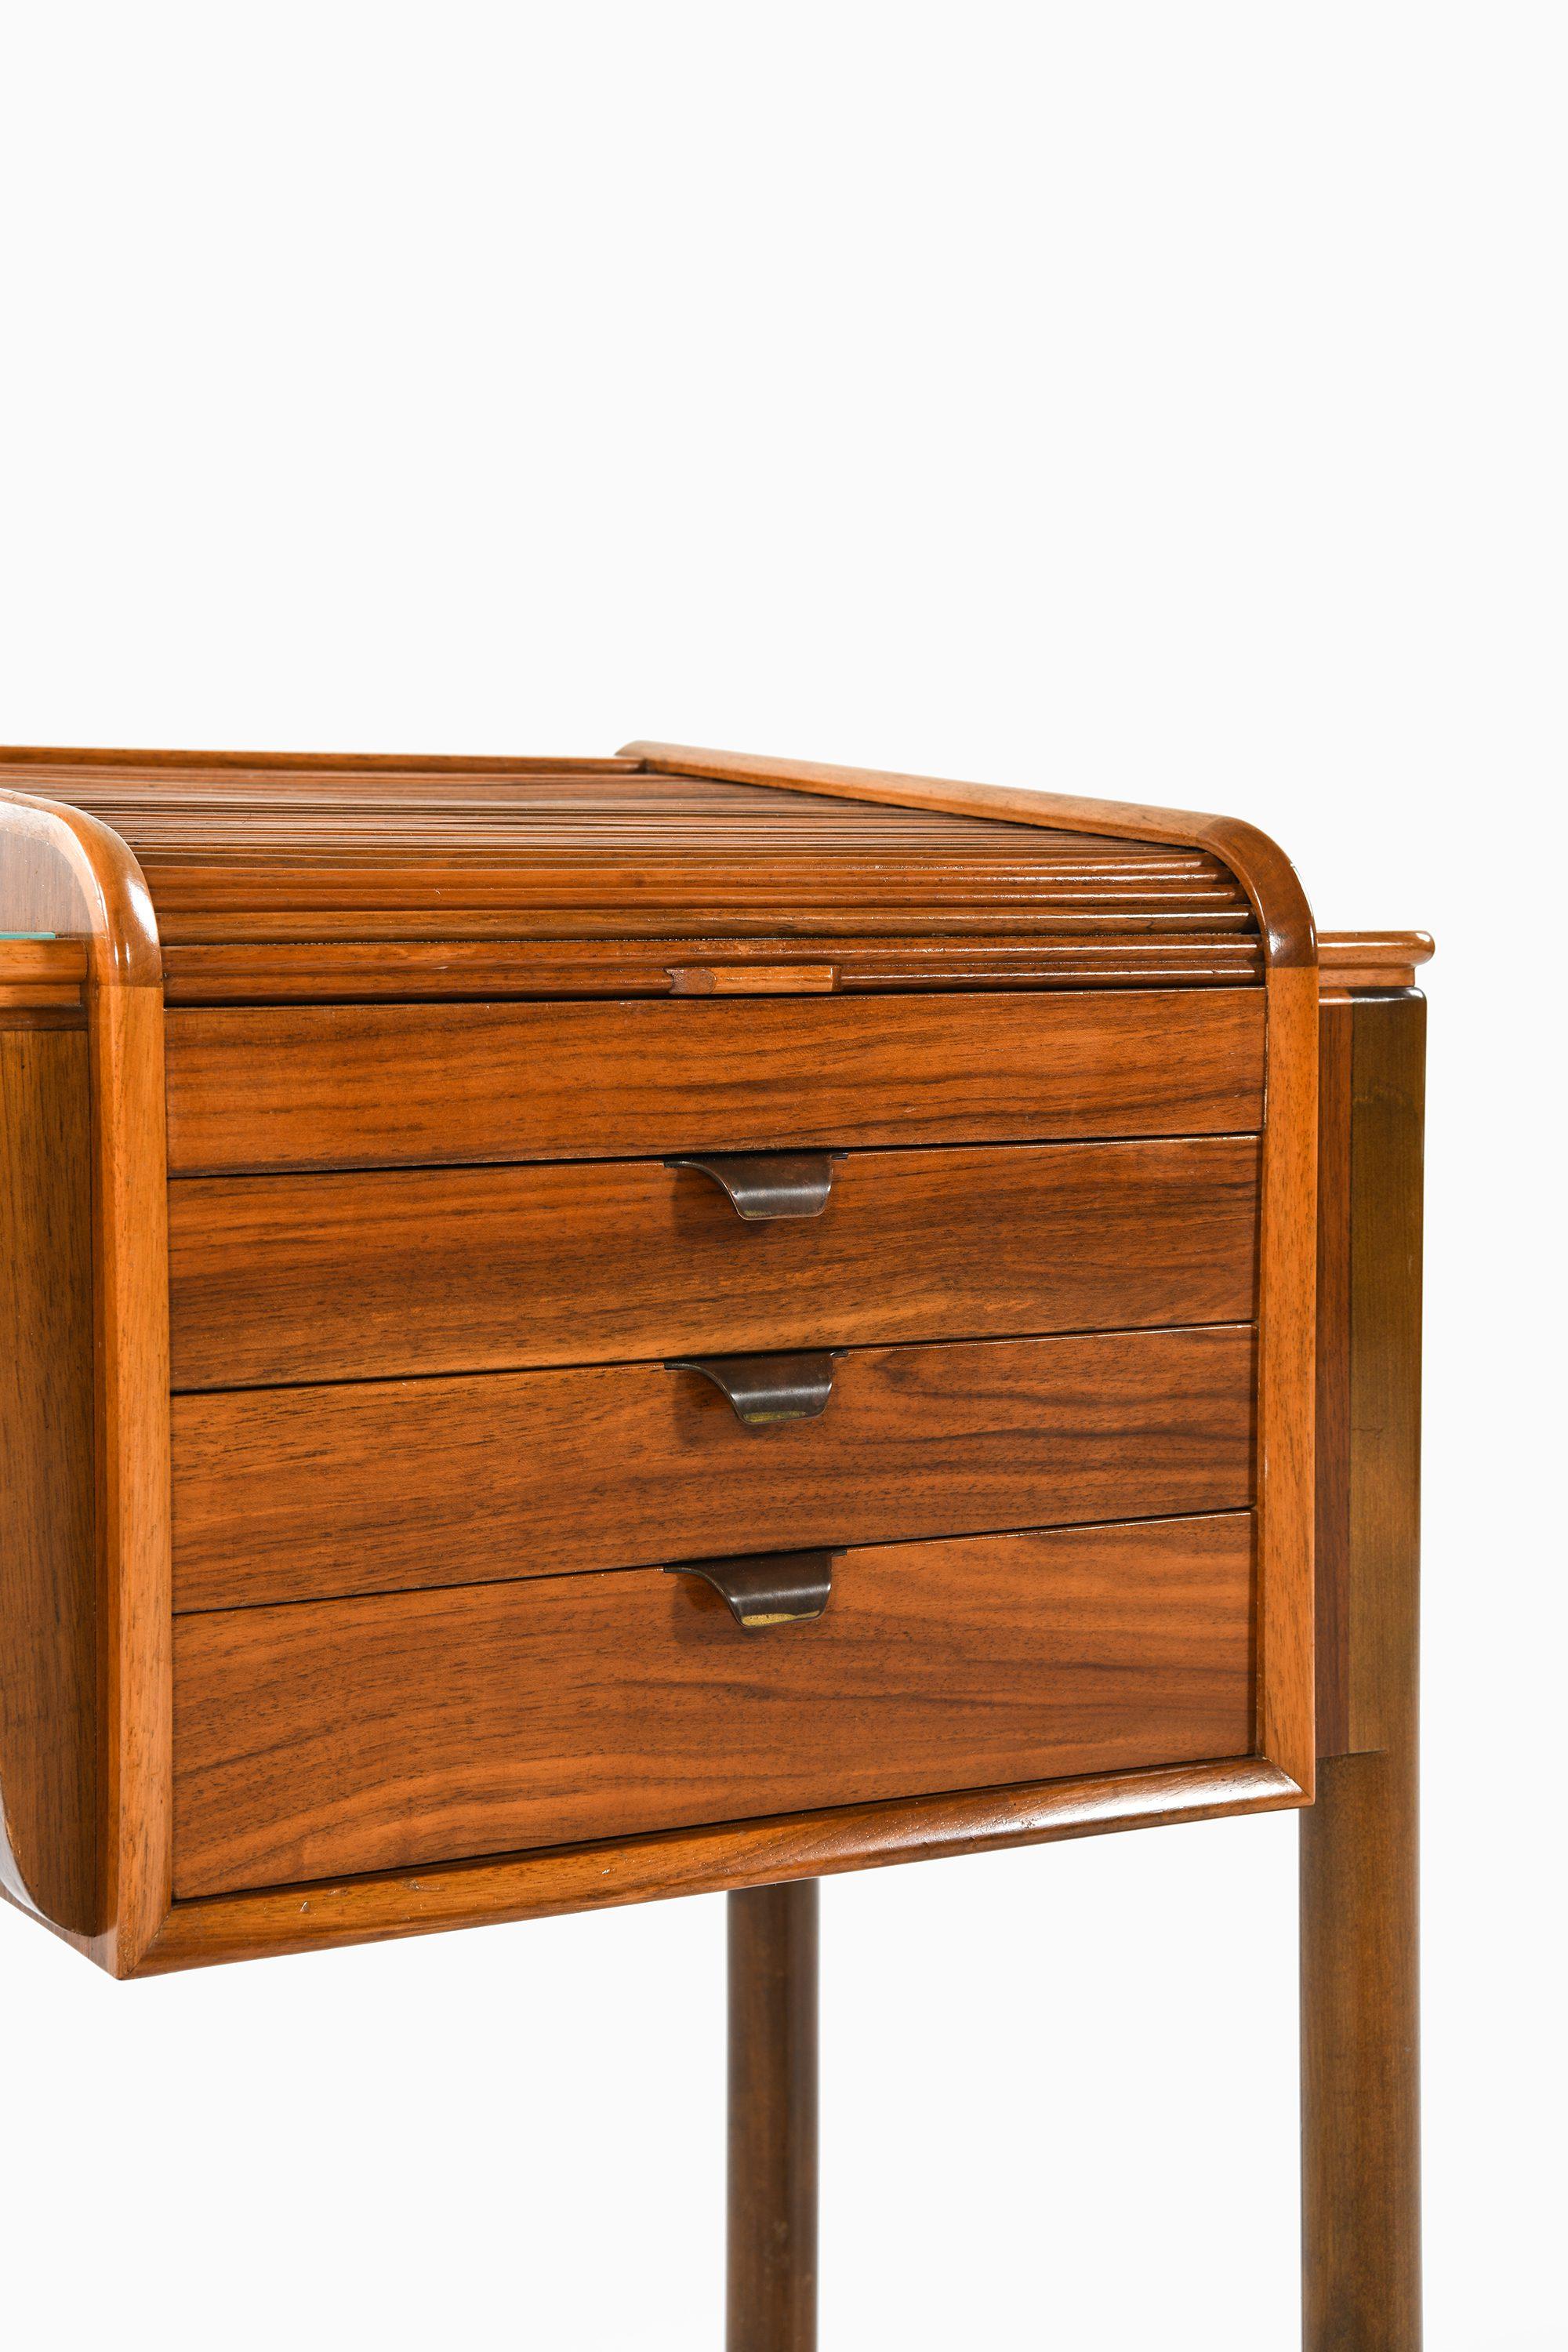 20th Century Vanity in Walnut, Glass and Brass Attributed to Carl-Axel Acking, 1940's For Sale